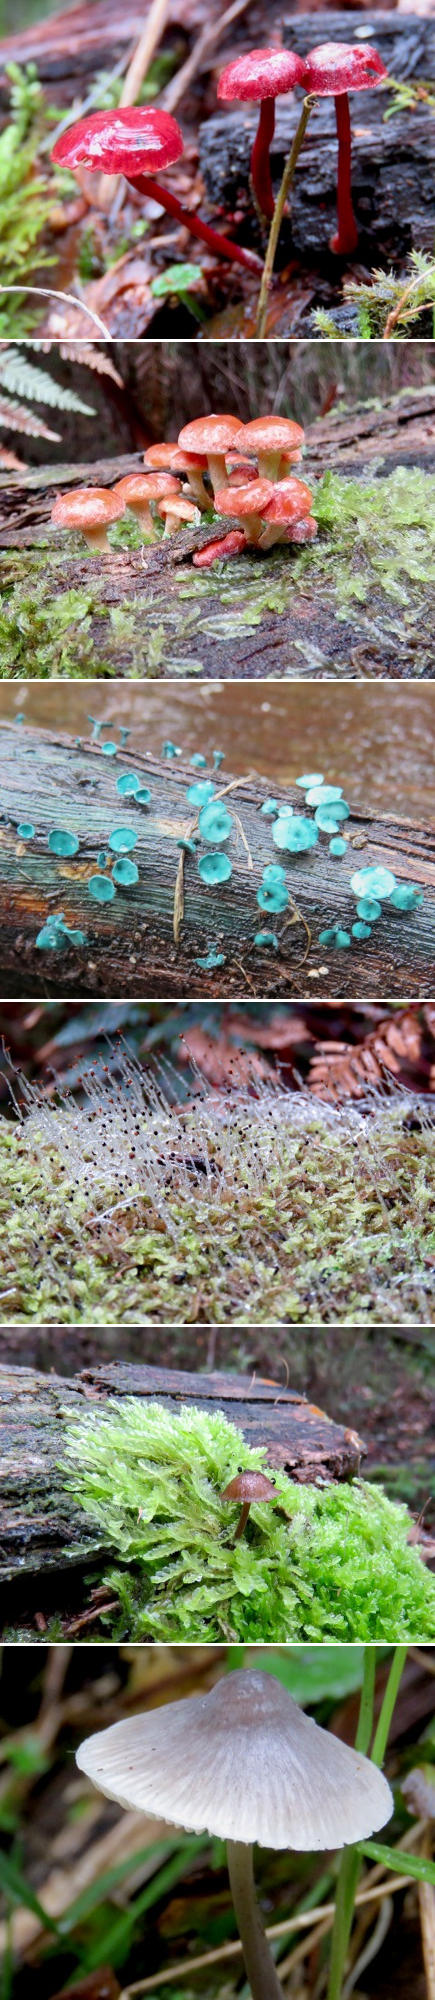 Various fungi found in the park